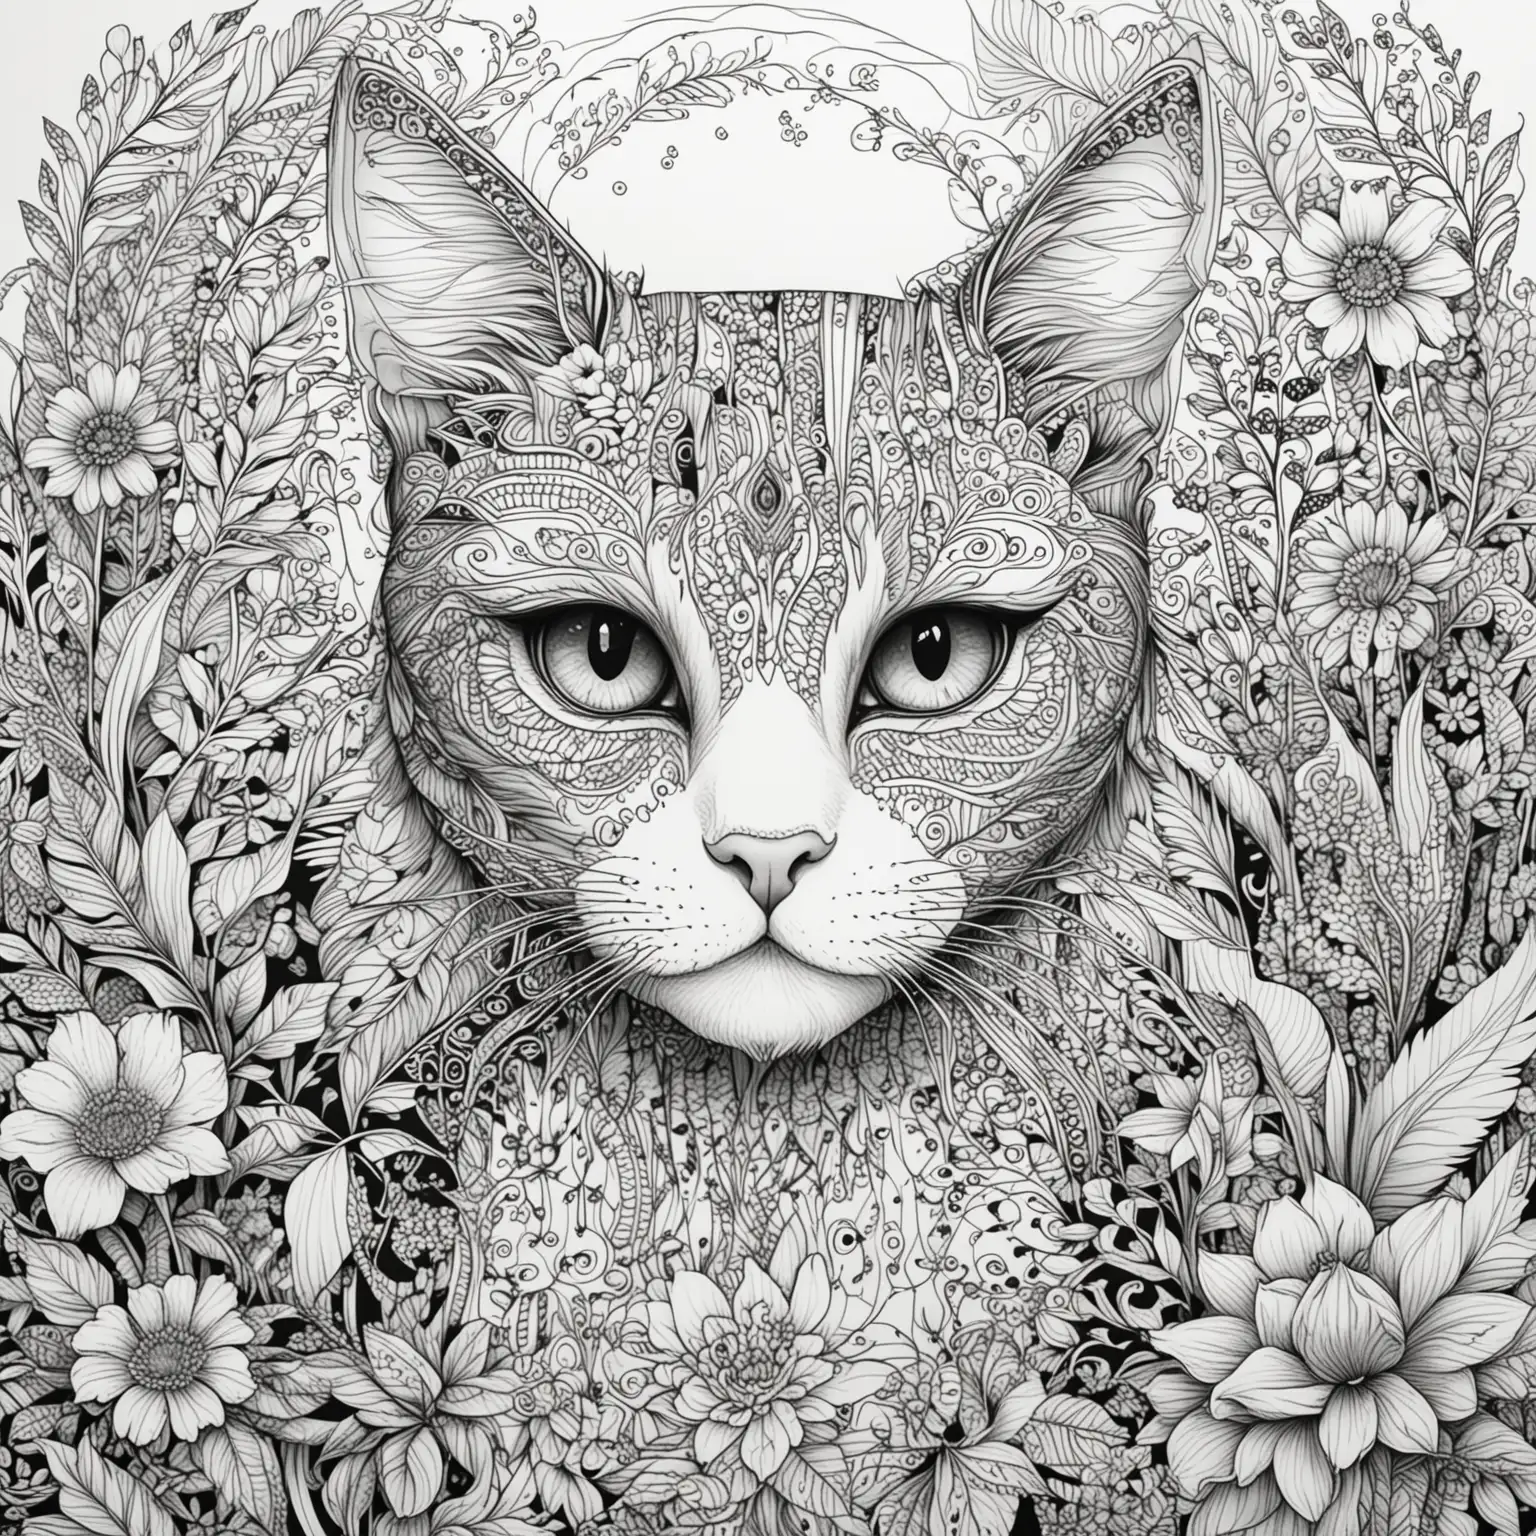 Zentangle Cat Adult Coloring Page Floral Ambiance in Black and White